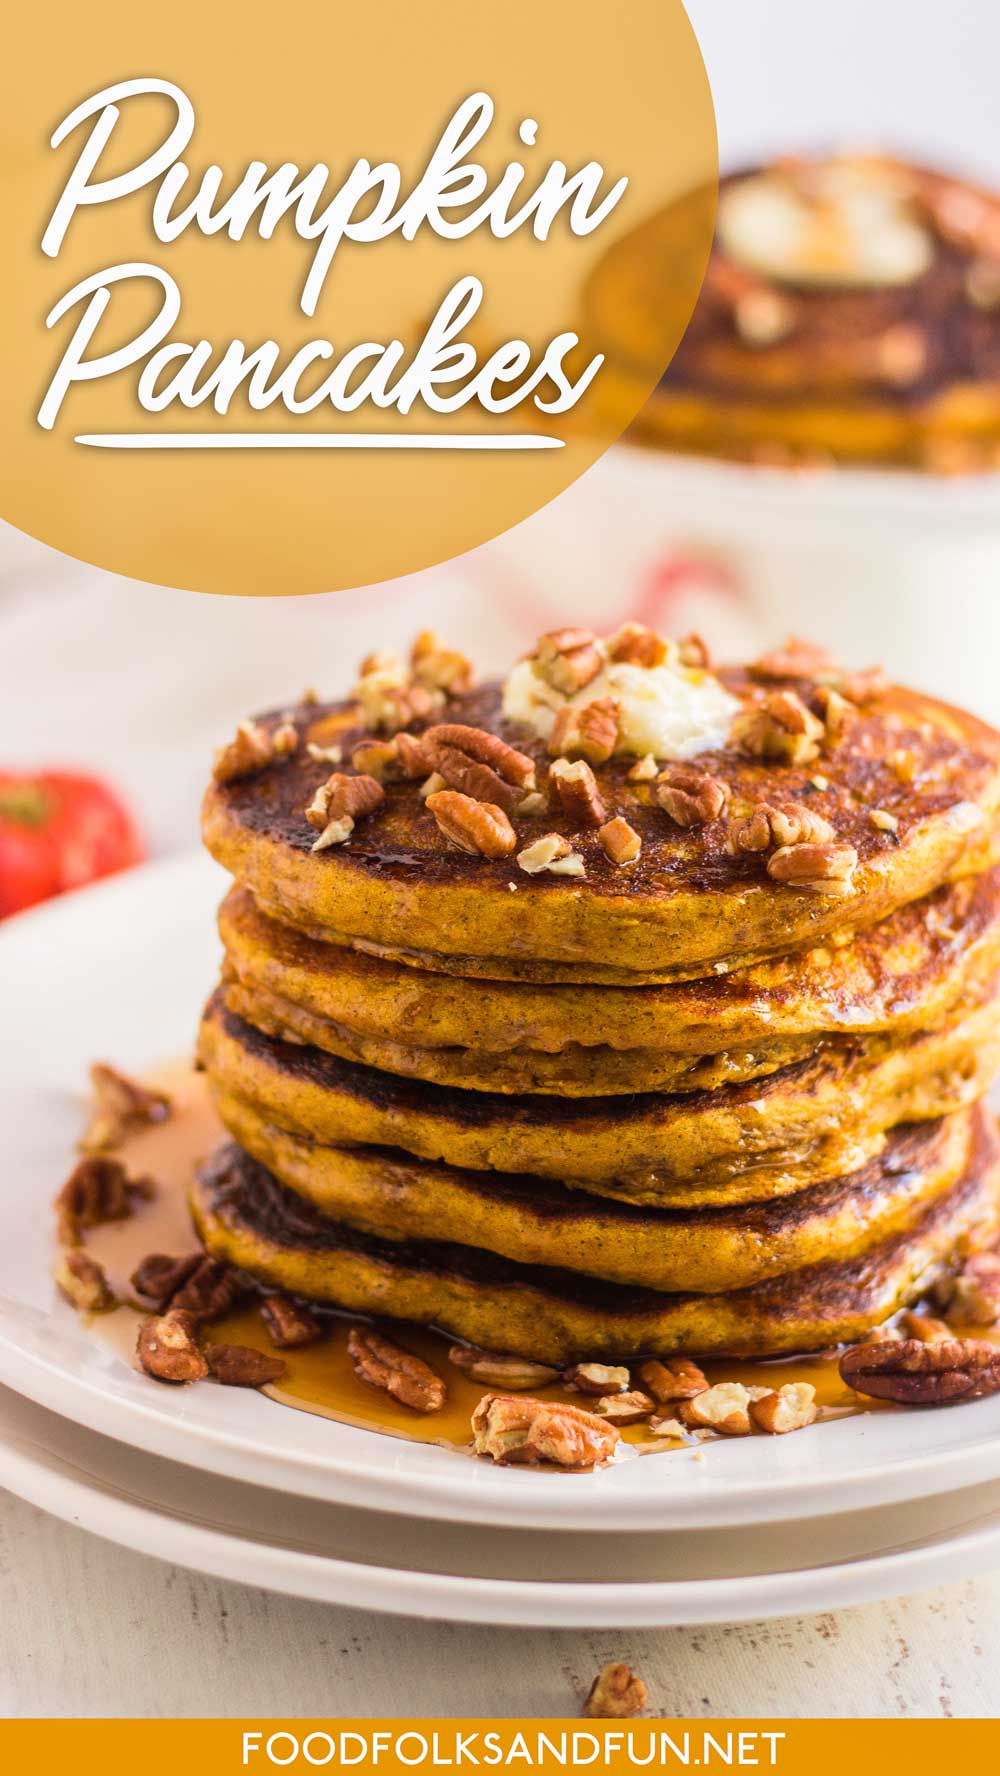 Delicious and fluffy Pumpkin Pancakes that are so easy to make. They’re perfect for Fall breakfast or brunch, and they’re always a crowd pleaser!